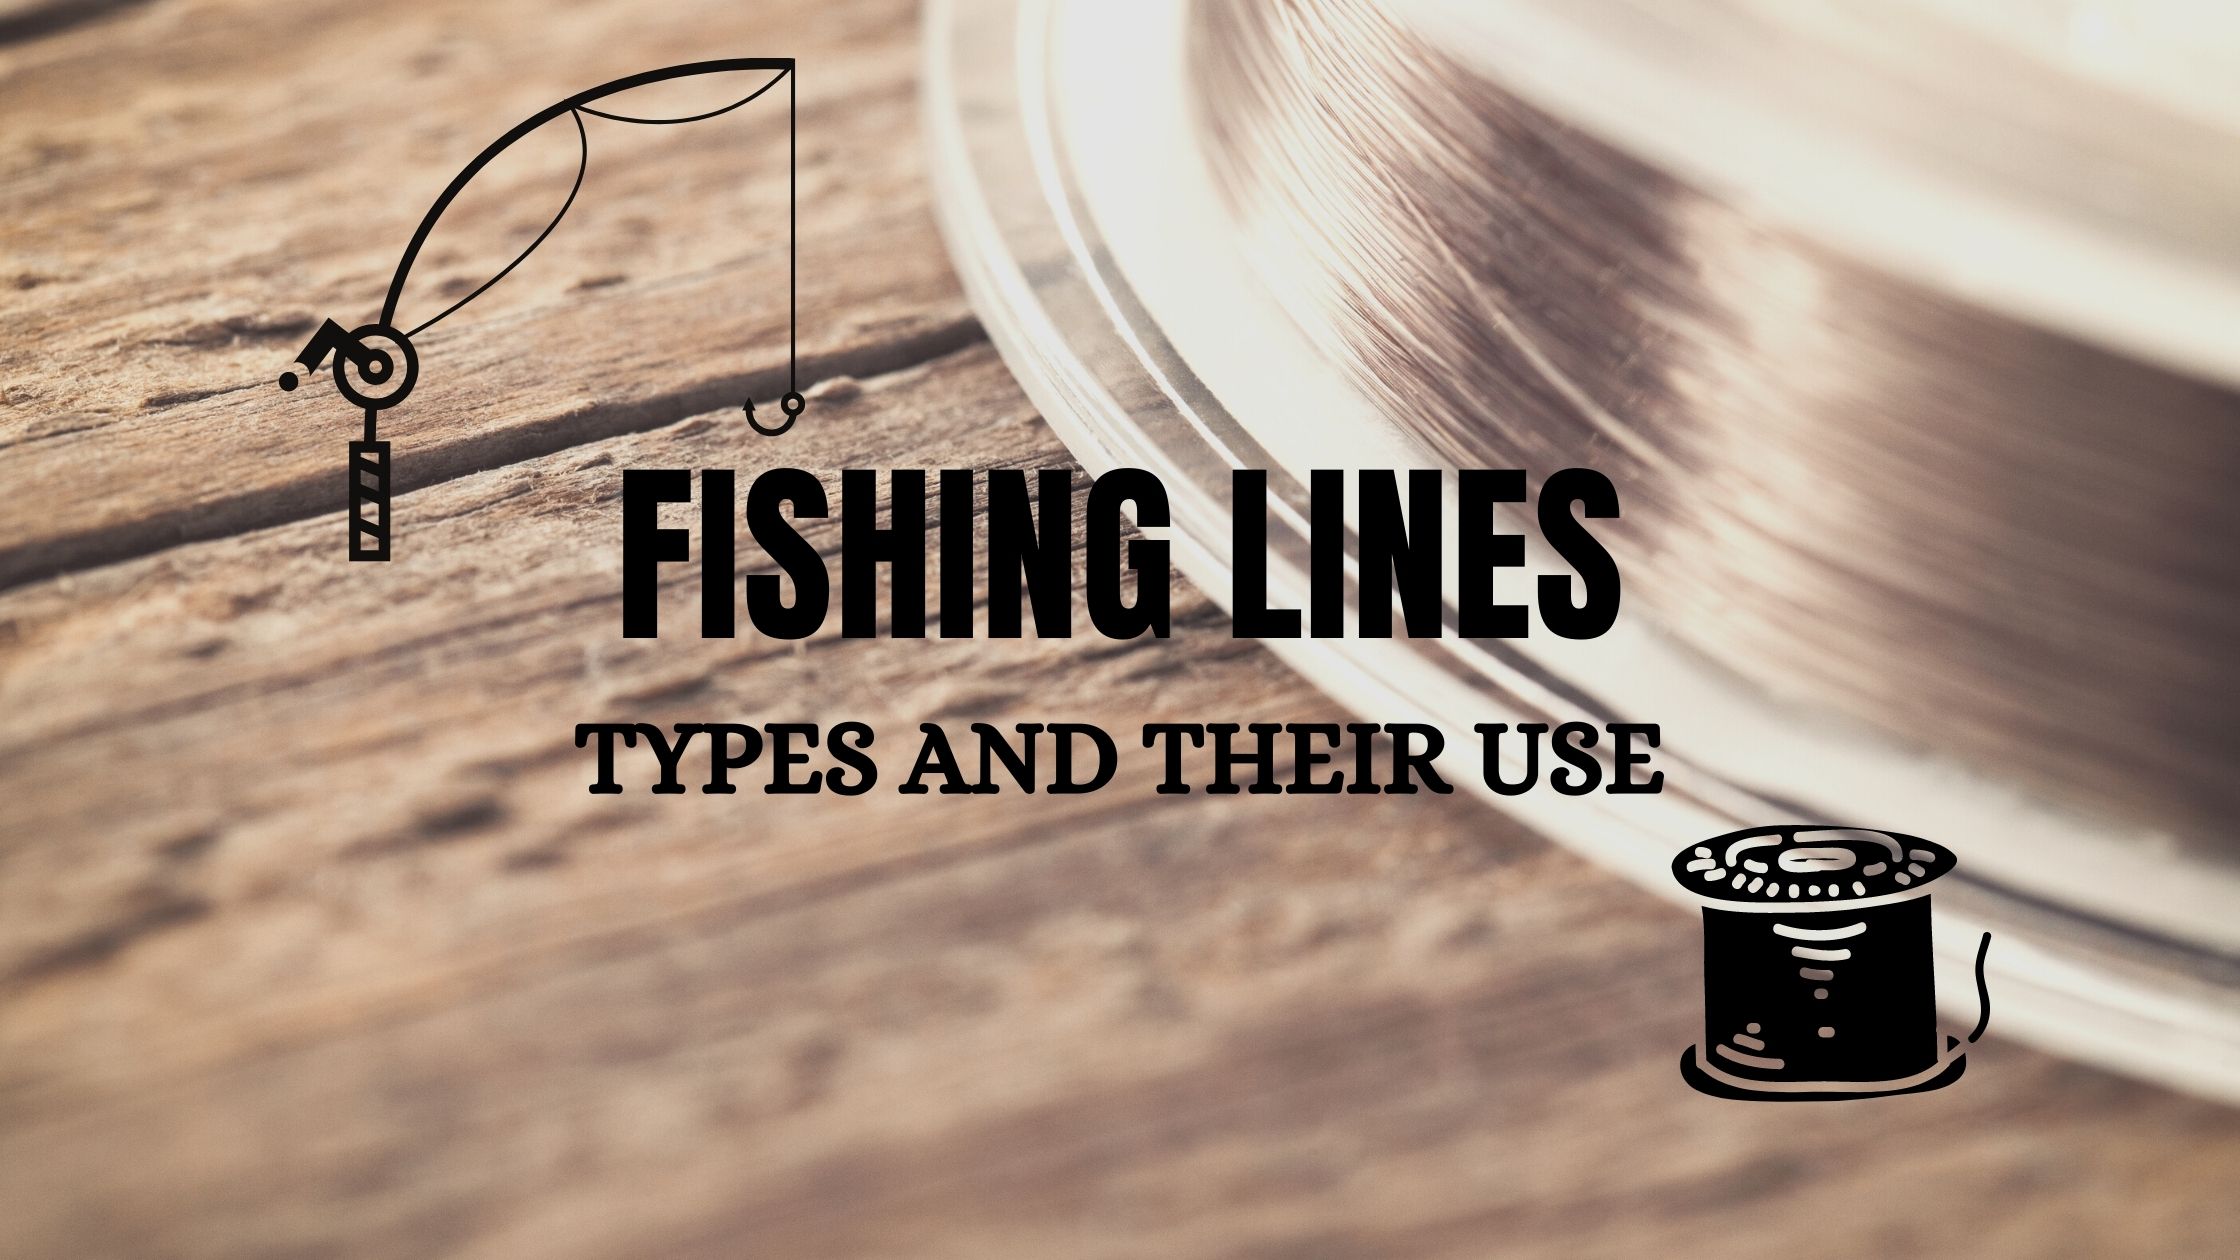 Different 5 Types of Fishing Lines and Their Use